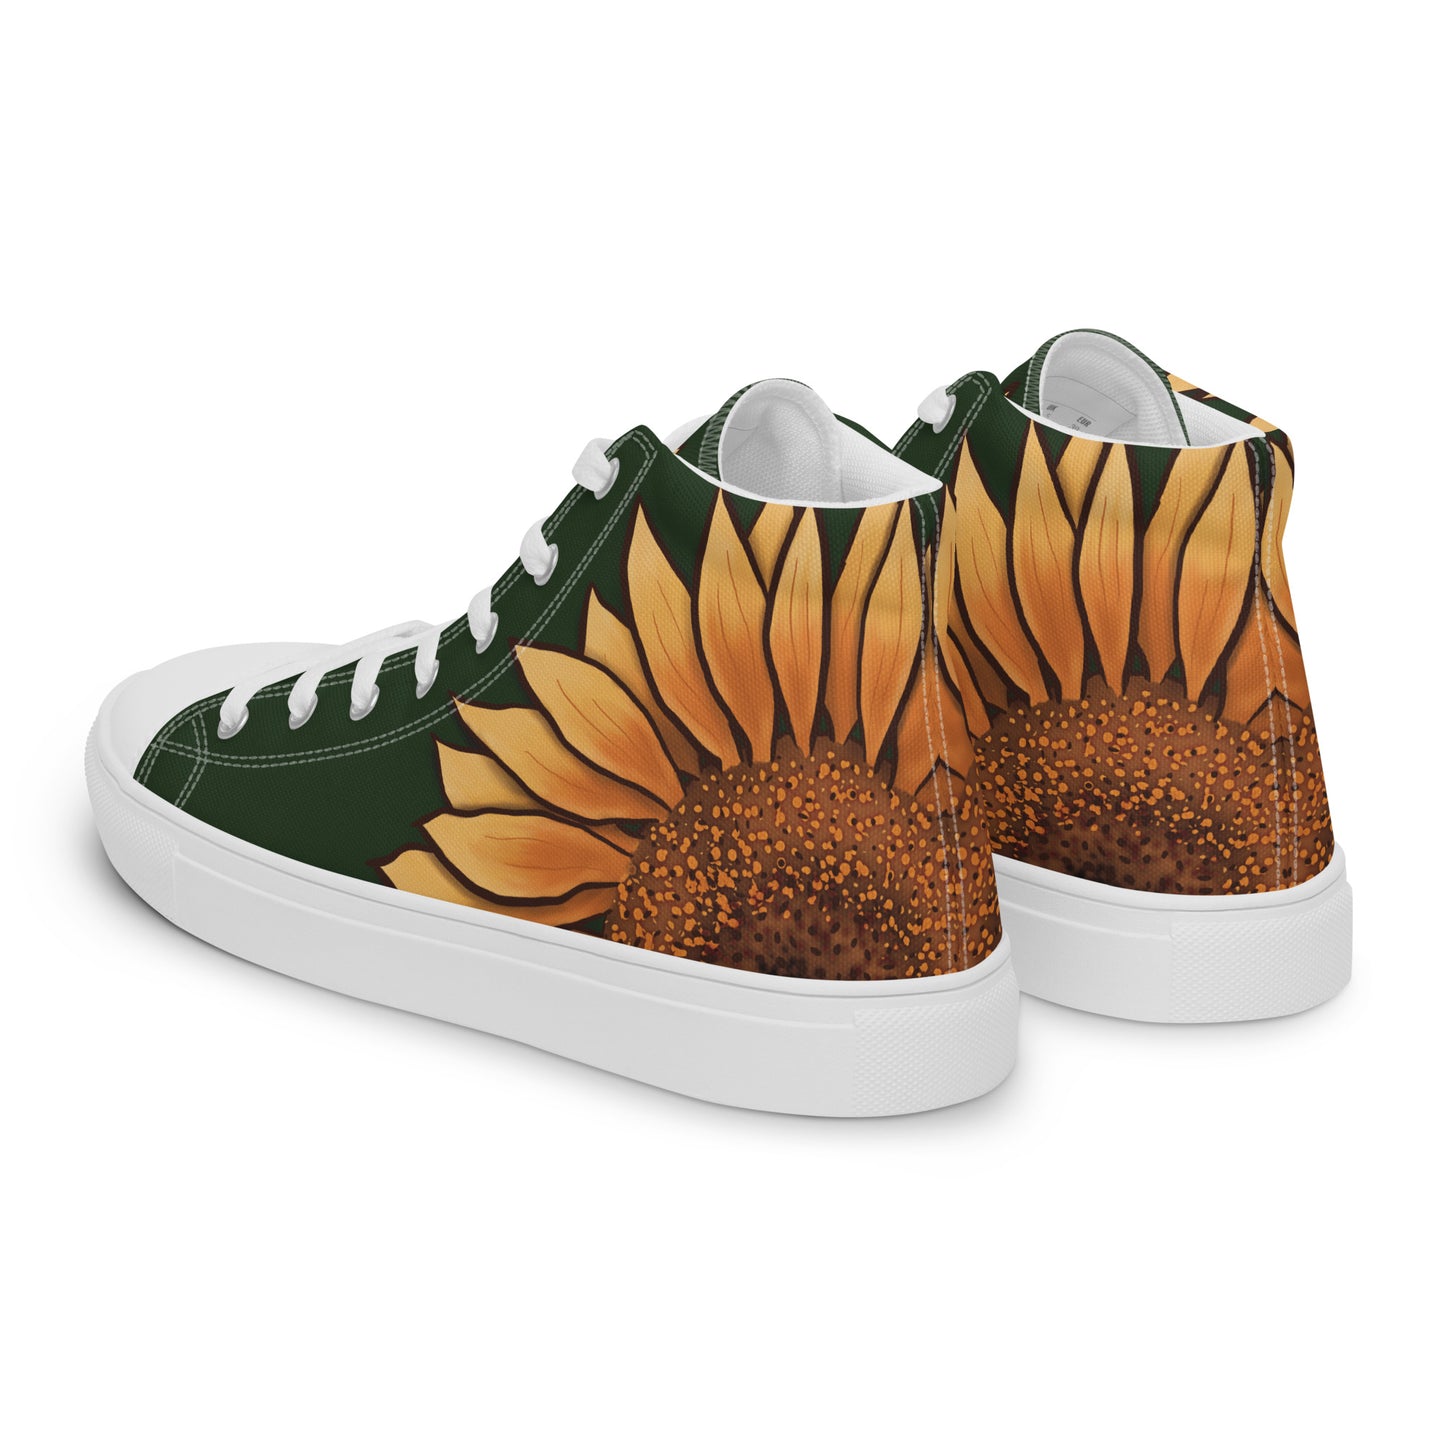 Left back view: a dark green high top shoe with a large sunflower painting on the side, the middle starting around the heel and the petals wrapping around the side of the shoe, almost to the laces.